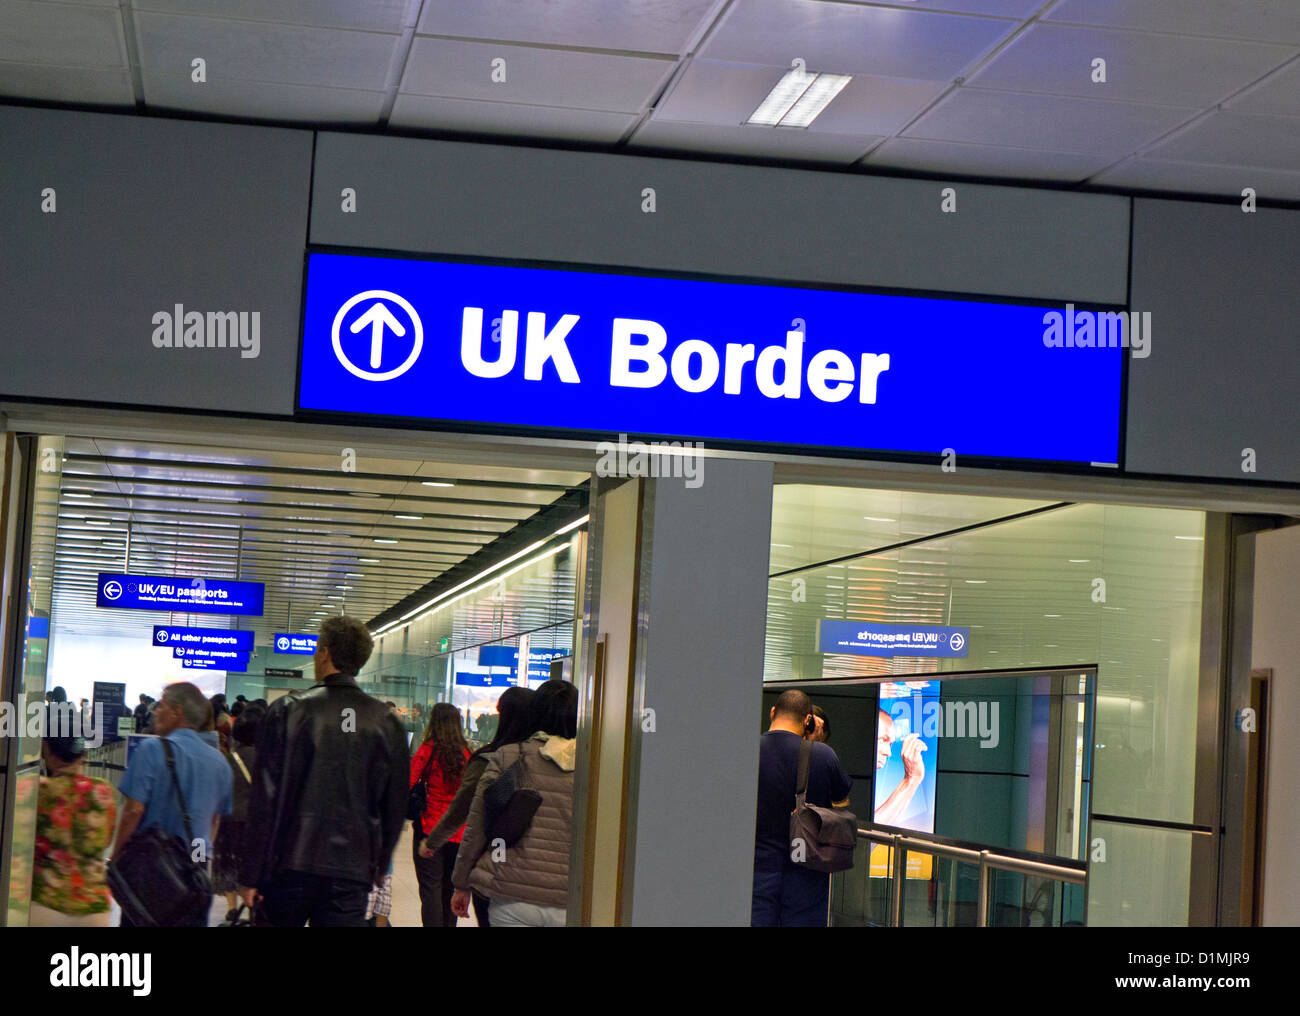 UK Border Control passport scrutiny area sign signage for arrivals arriving airline passengers at London Heathrow Airport terminal 3 UK Stock Photo